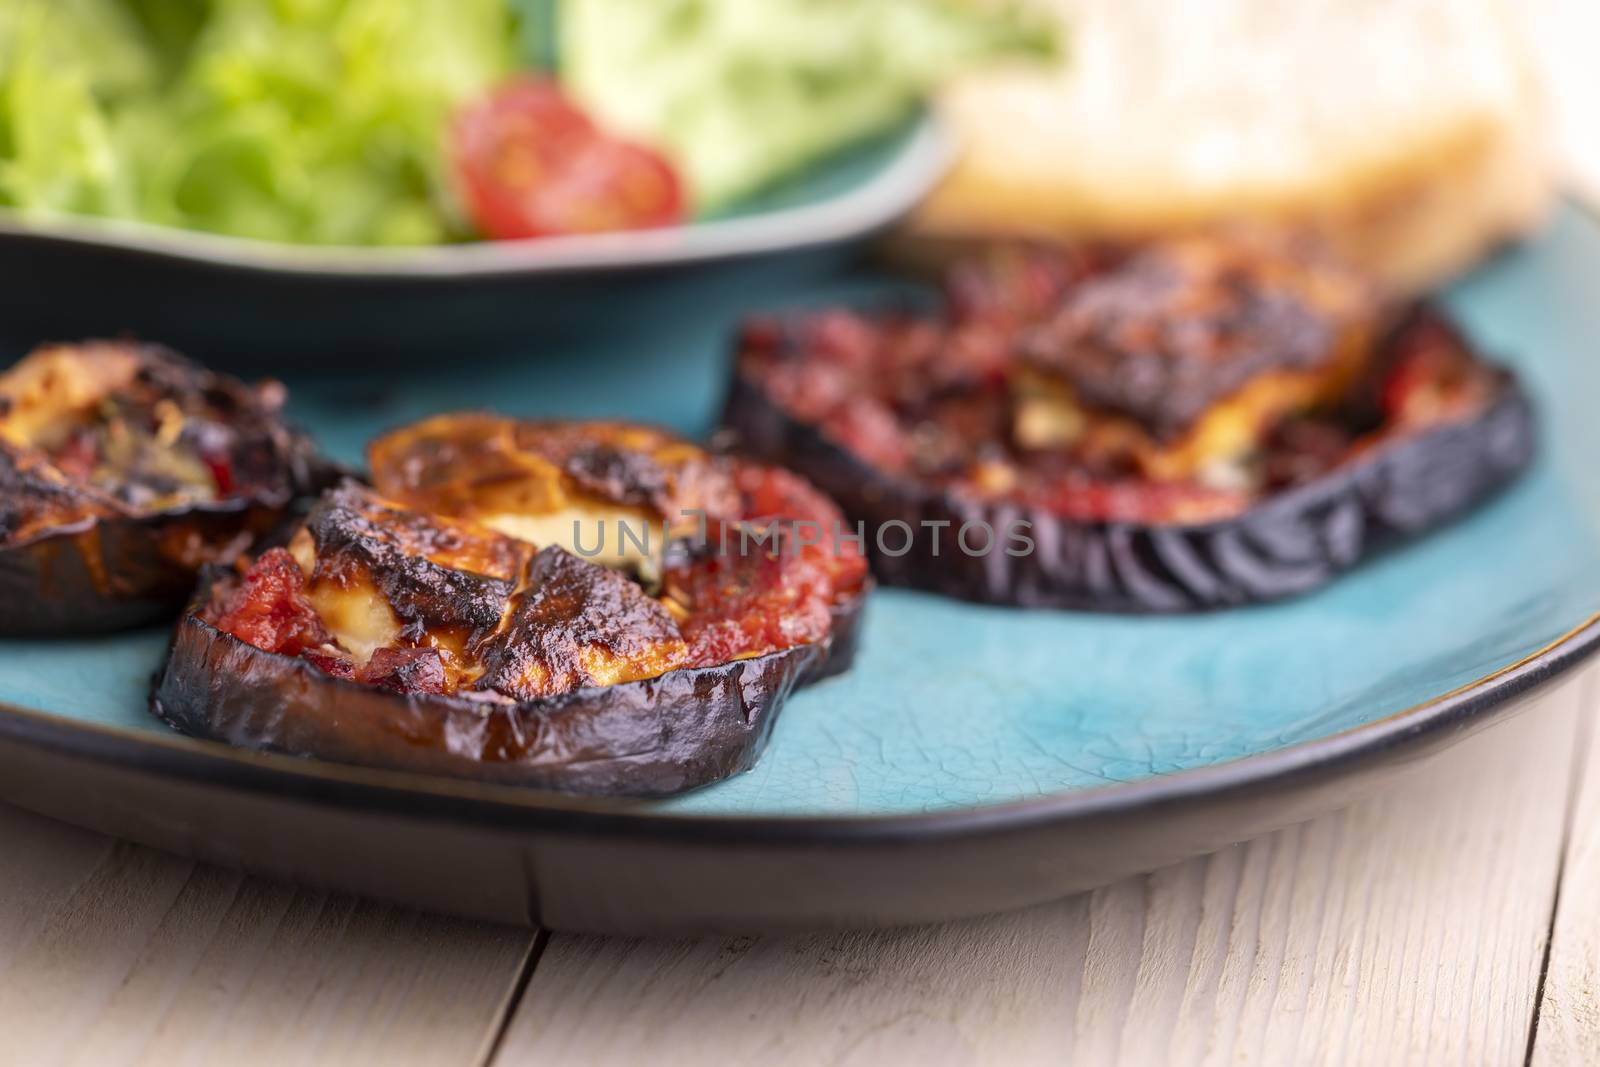 grilled eggplants by bernjuer